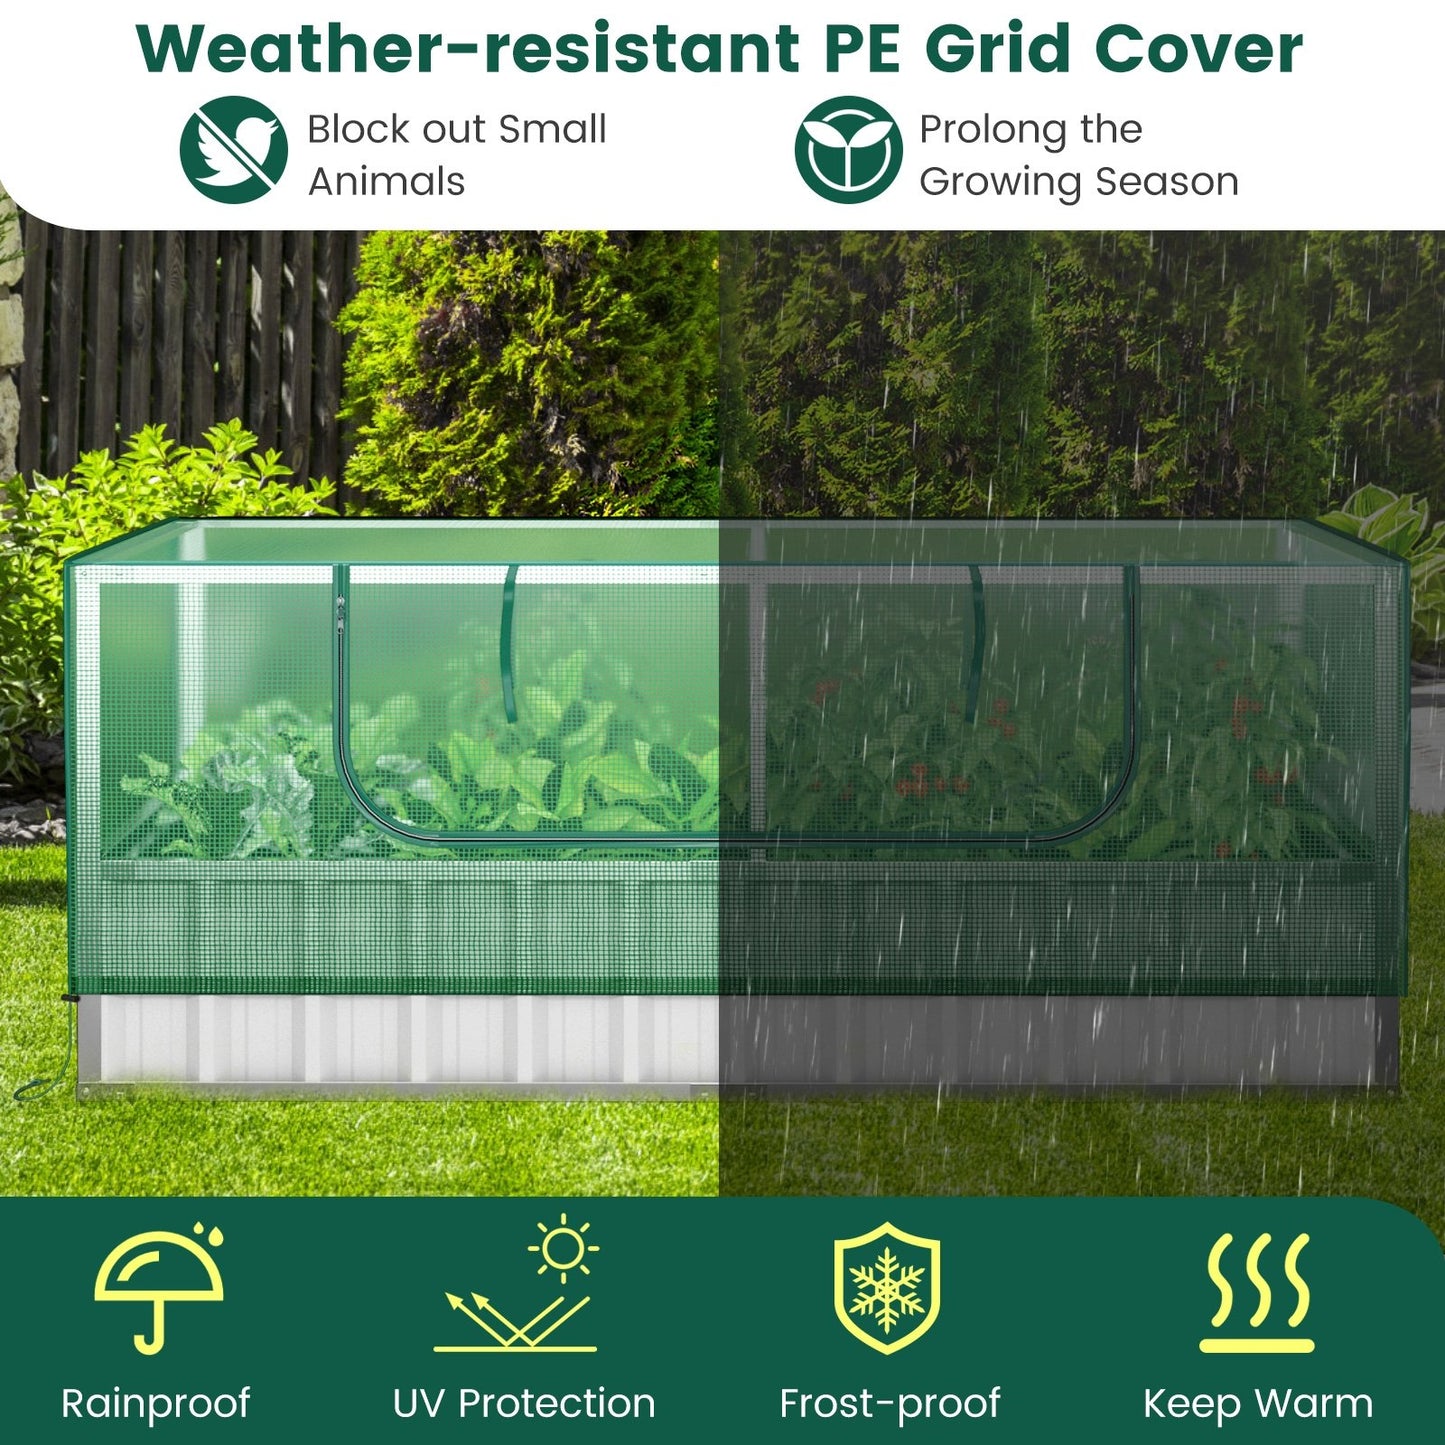 Galvanized Raised Garden Bed with Greenhouse Cover, Green - Gallery Canada